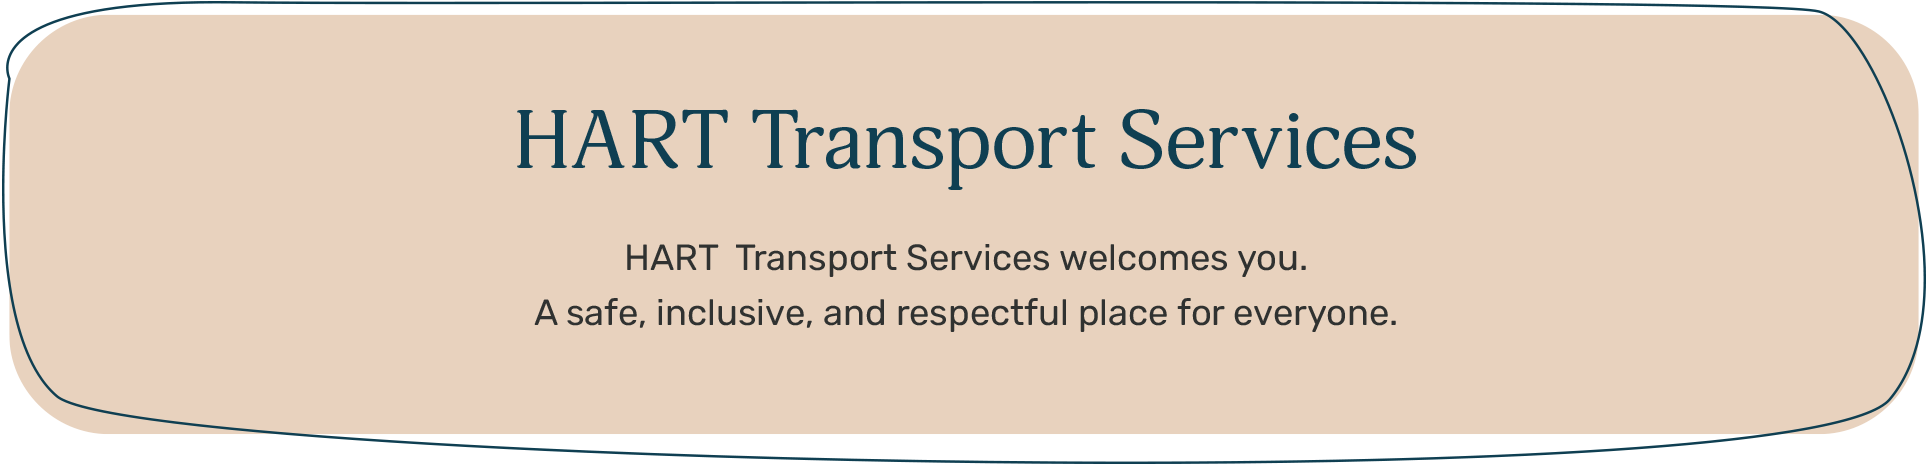 Kyogle Family Support Services - Hart Transport Services